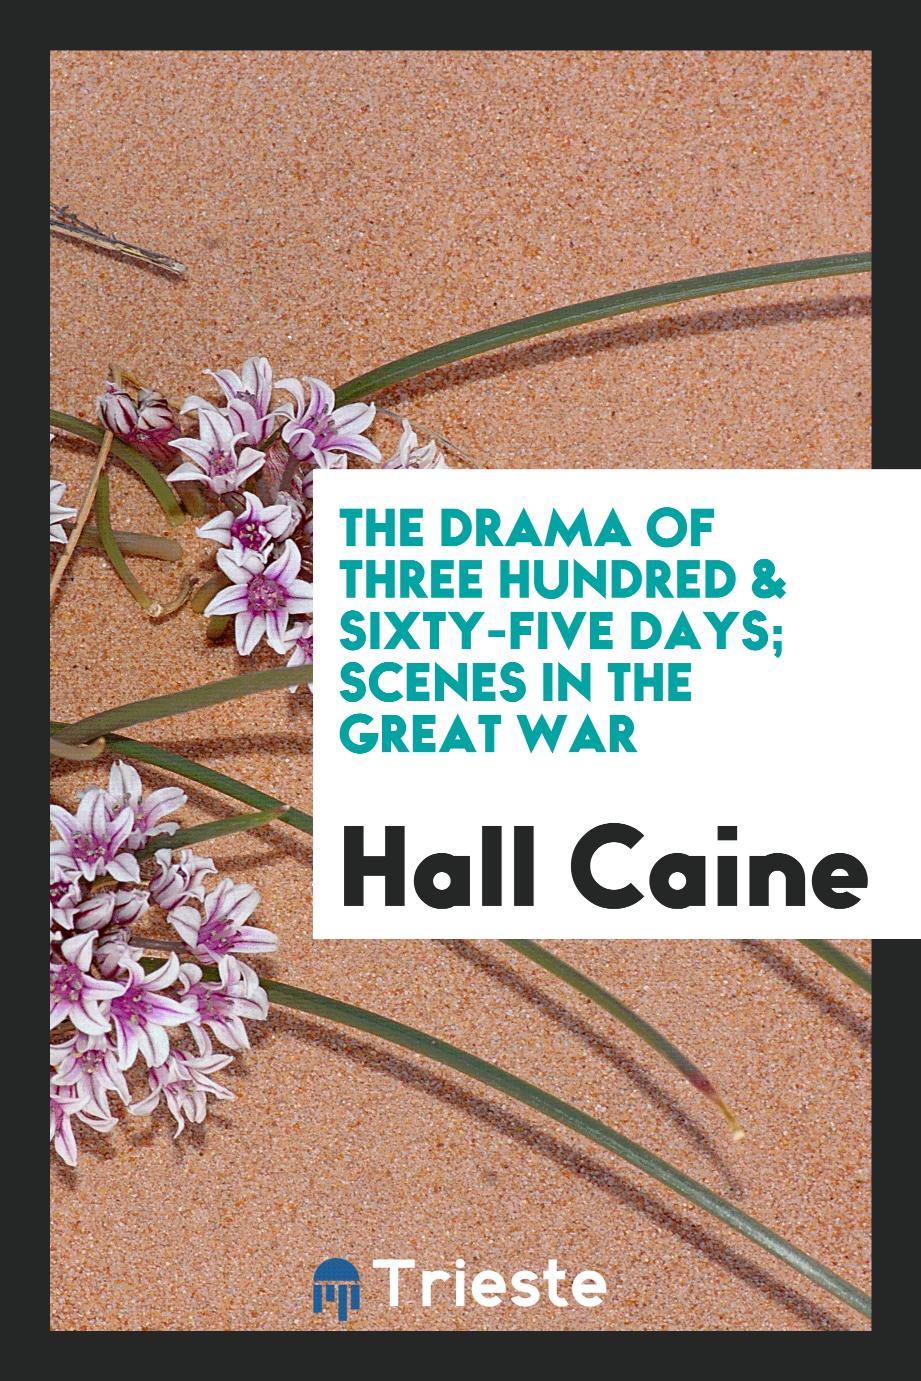 Hall Caine - The drama of three hundred & sixty-five days; scenes in the great war